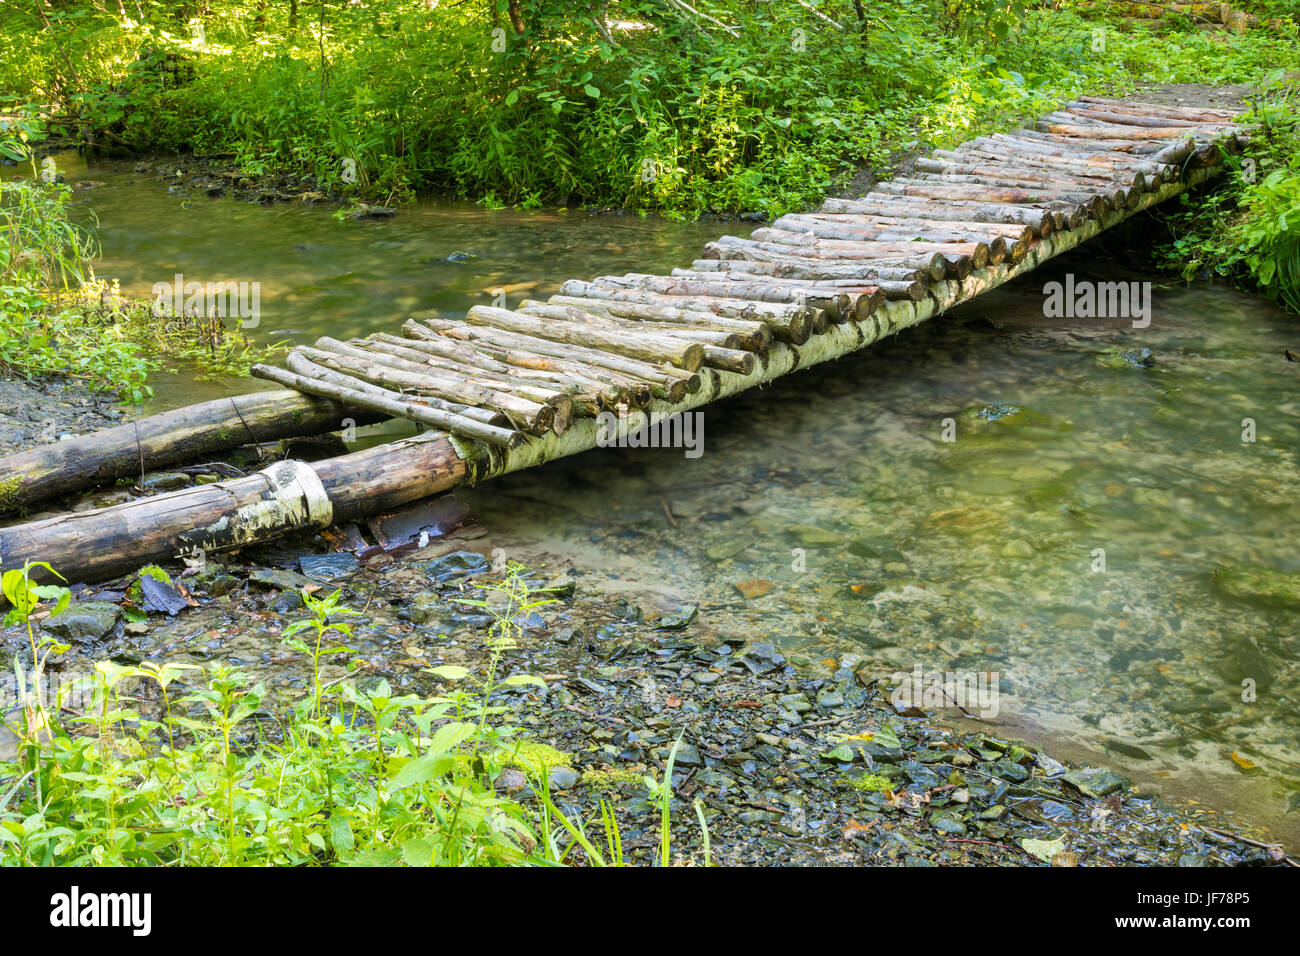 Wooden bridge over a small river forest Stock Photo